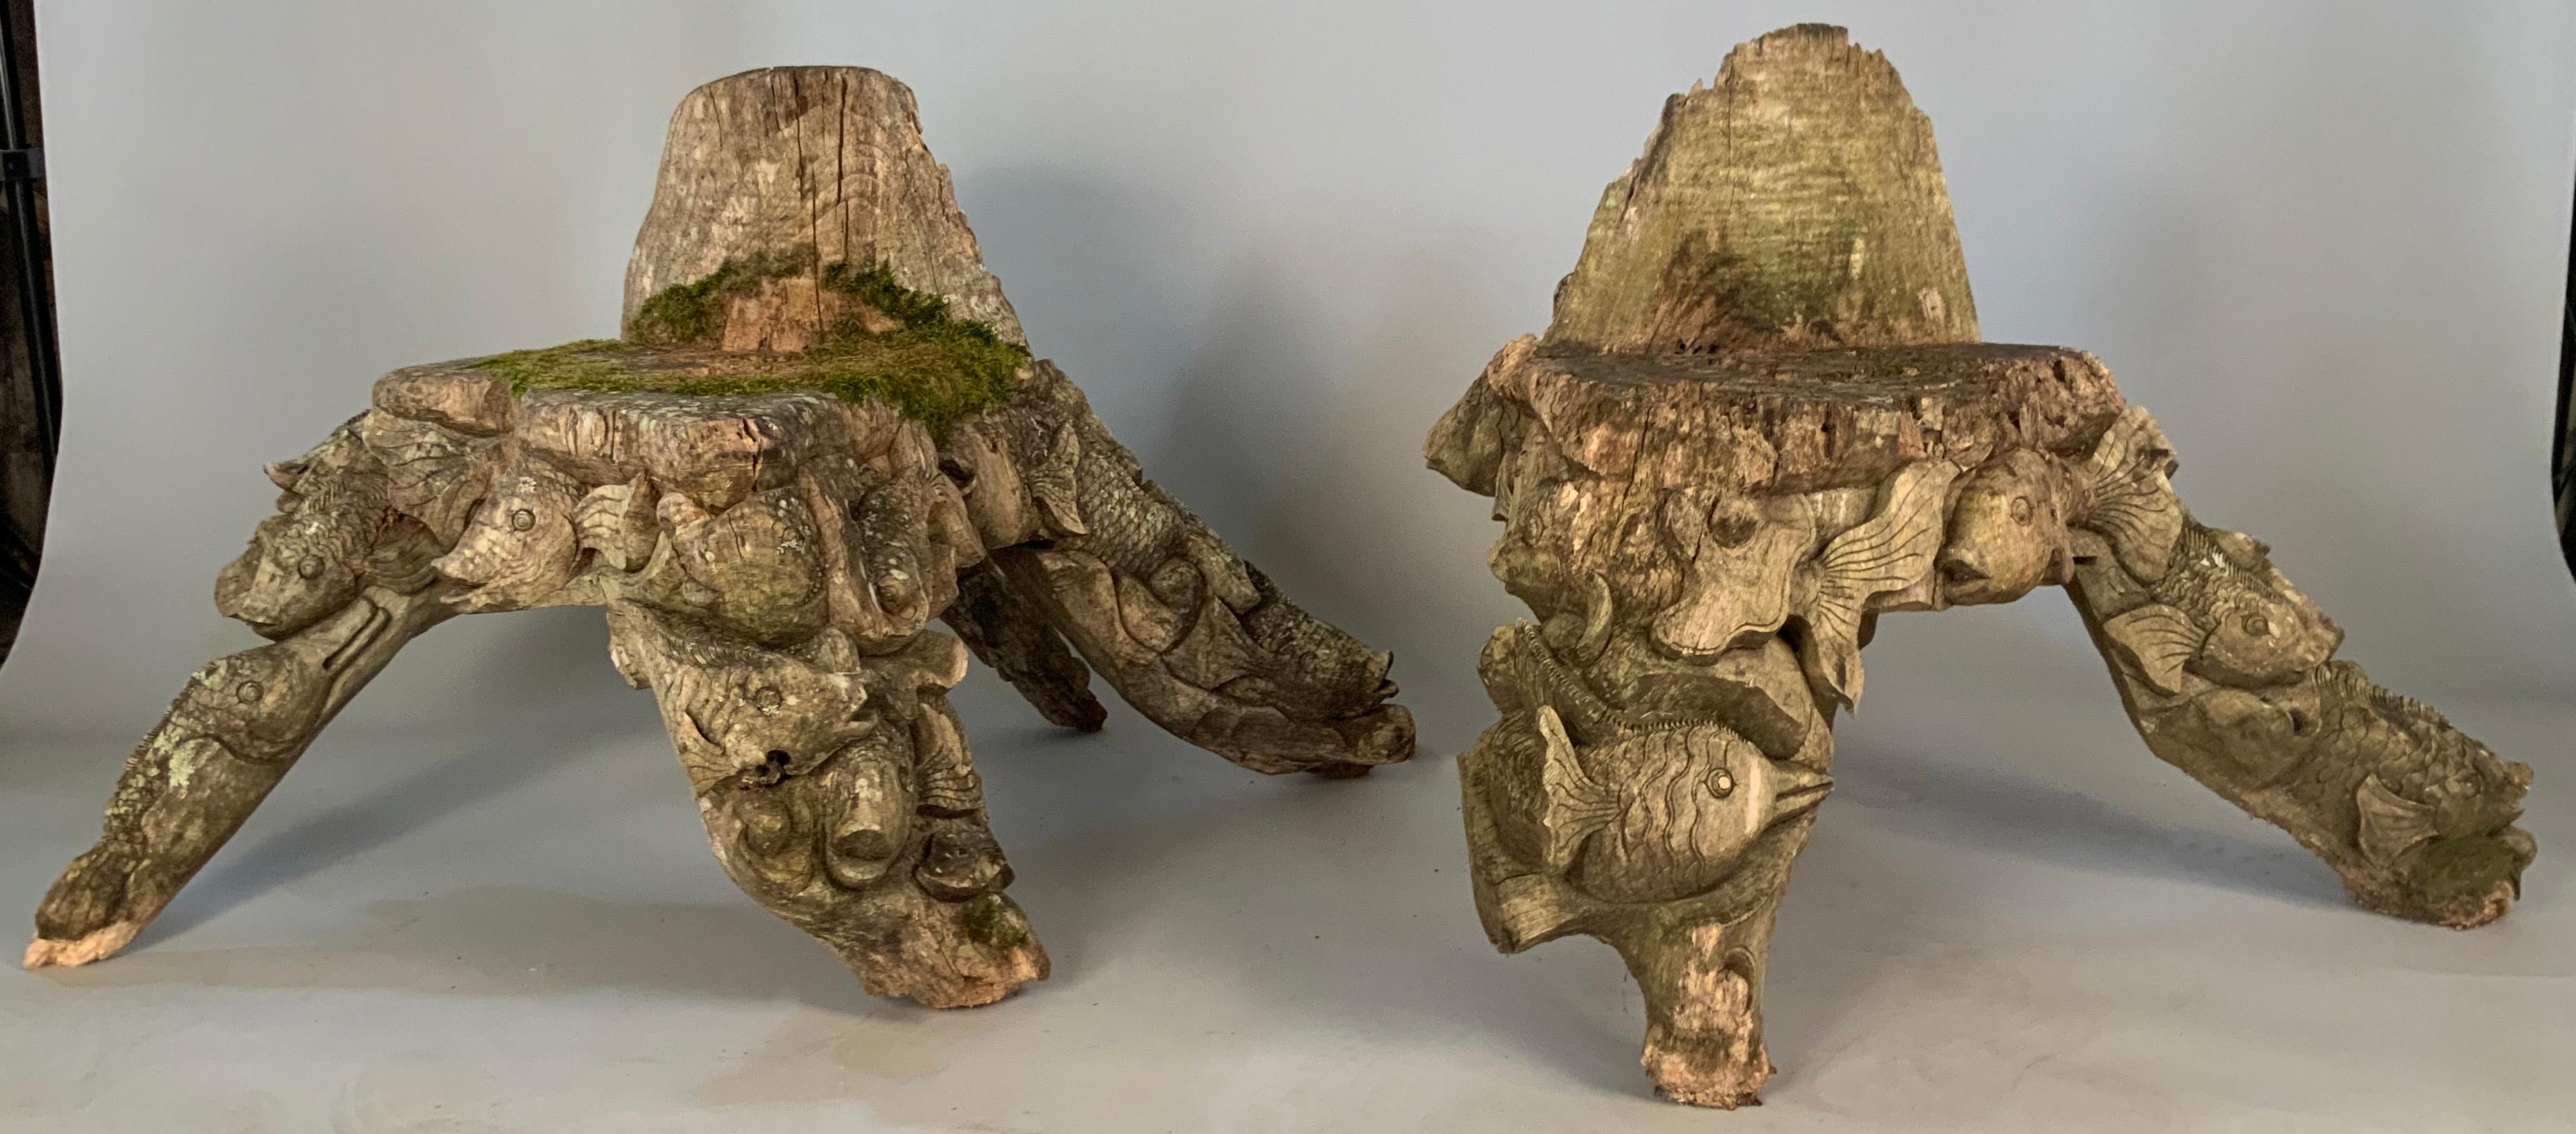 A pair of very unusual vintage mid-20th century carved wood chairs made with the forms of koi fish covering the legs and backs of the chairs, these are relics with an amazing amount of character, and although they are stable, they are not prepared